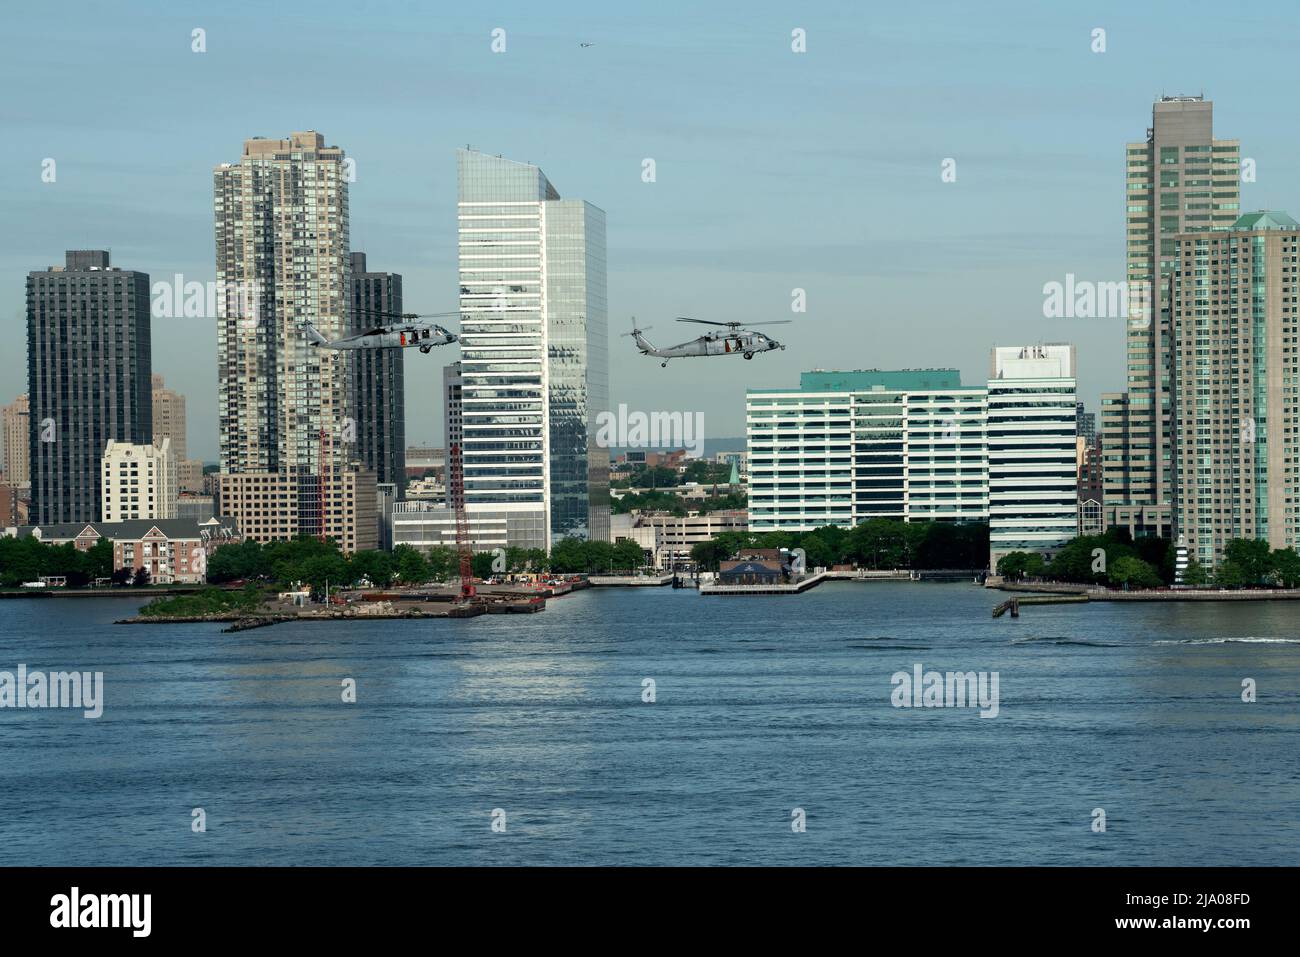 Two helicopters from the US Navy's Helicopter Sea Combat Squadron (HSC) flying over the Hudson River and Jersey City, New Jersey as part of Fleet Week Stock Photo